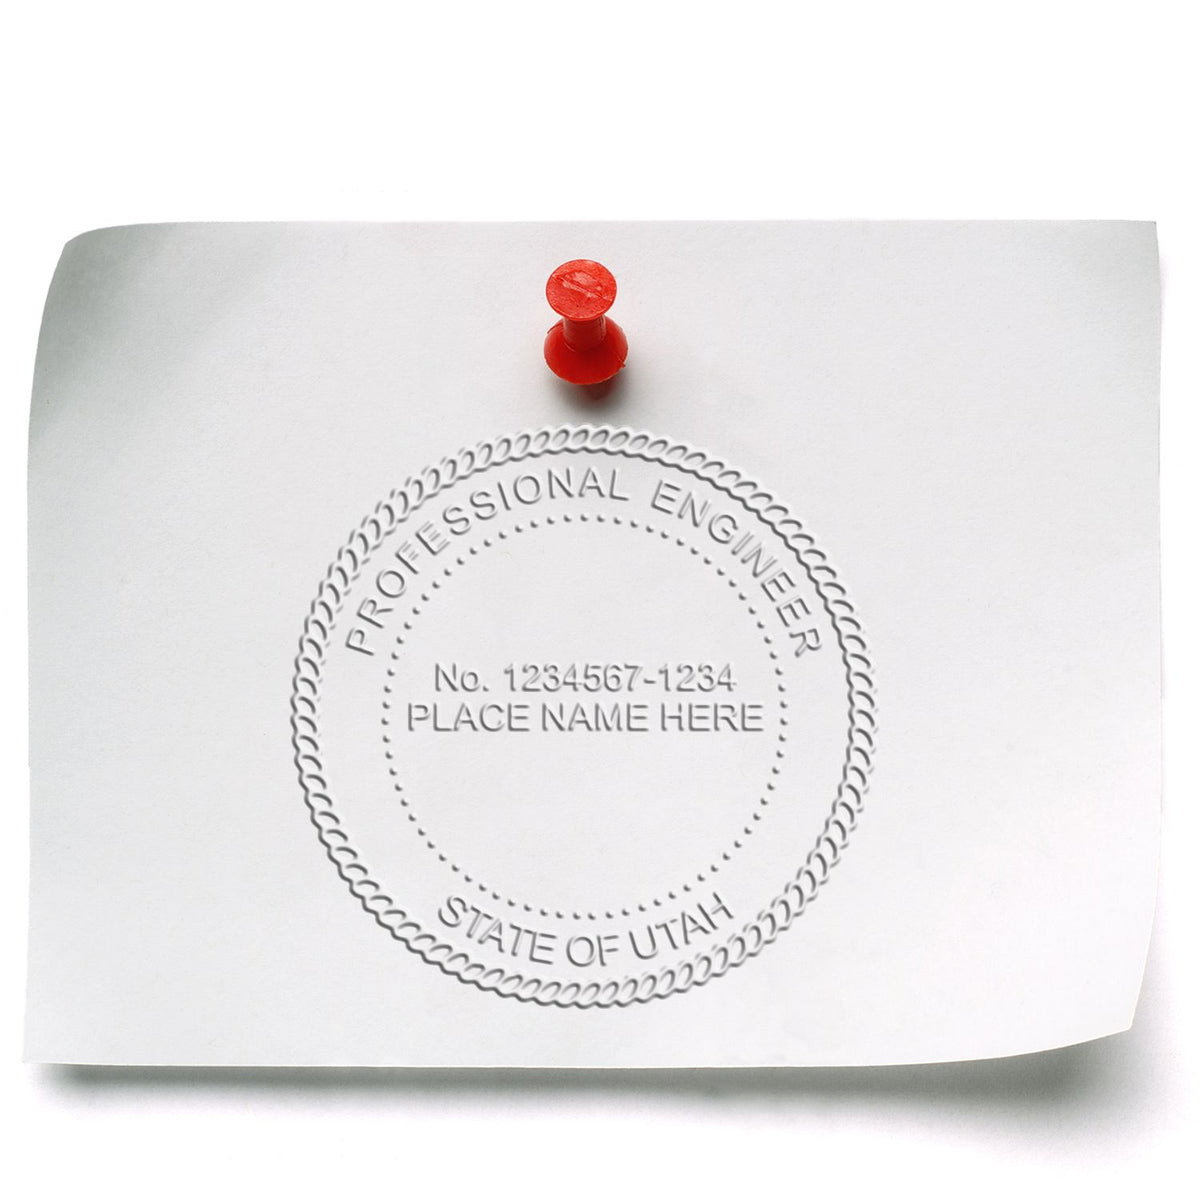 This paper is stamped with a sample imprint of the Utah Engineer Desk Seal, signifying its quality and reliability.